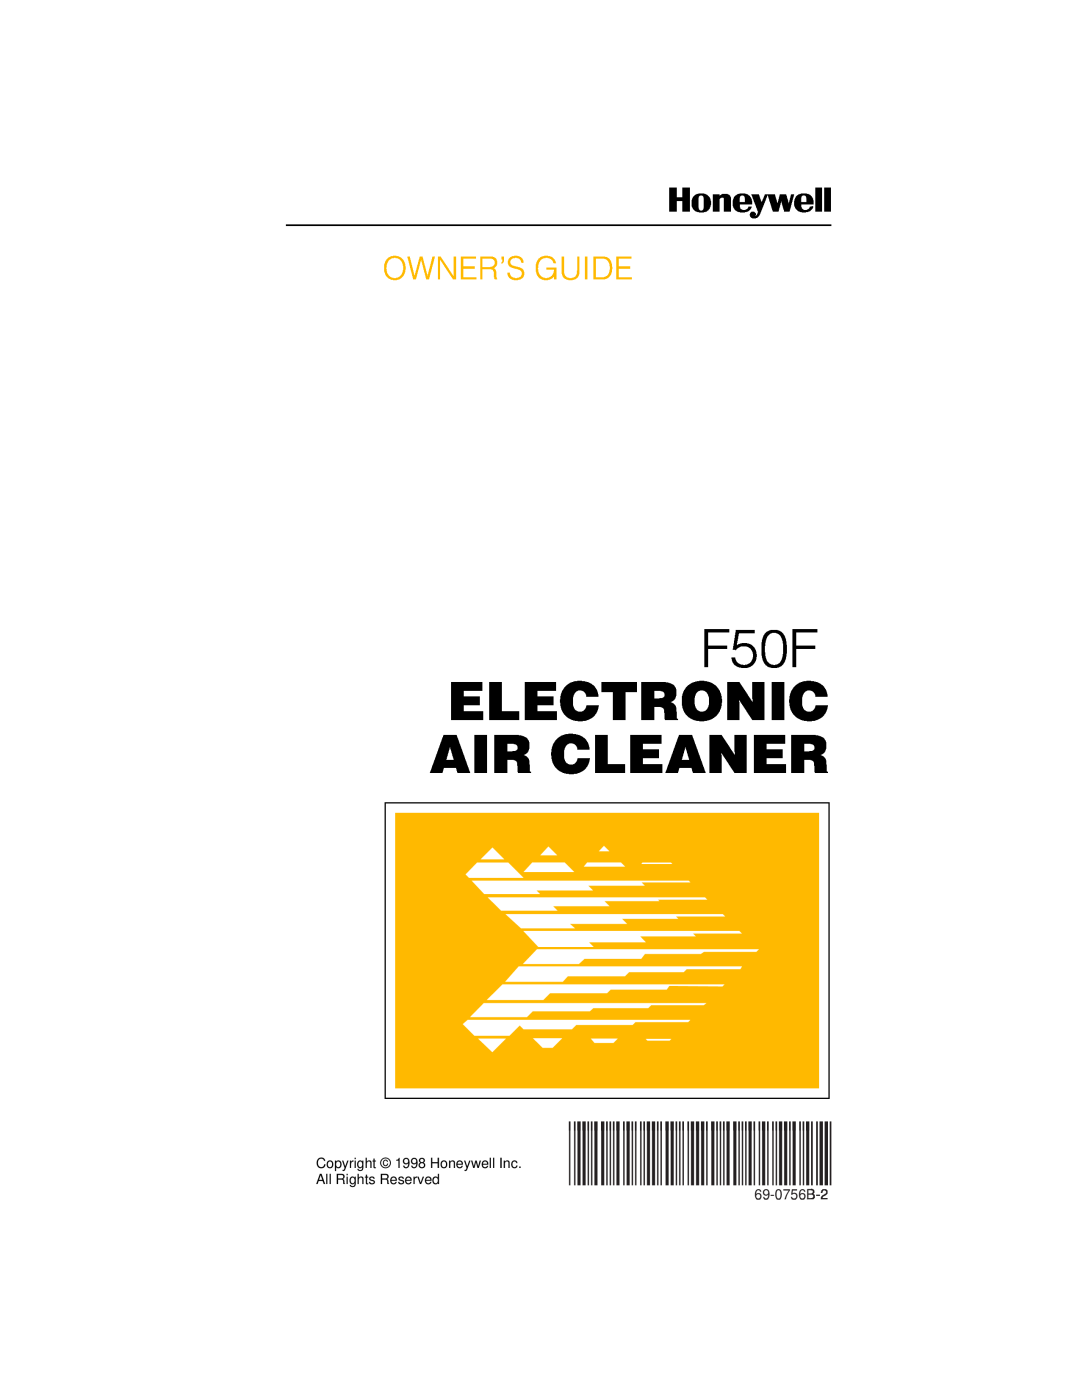 Honeywell F50F manual Electronic Air Cleaner, Owner’S Guide, Copyright 1998 Honeywell Inc All Rights Reserved, 69-0756B-2 